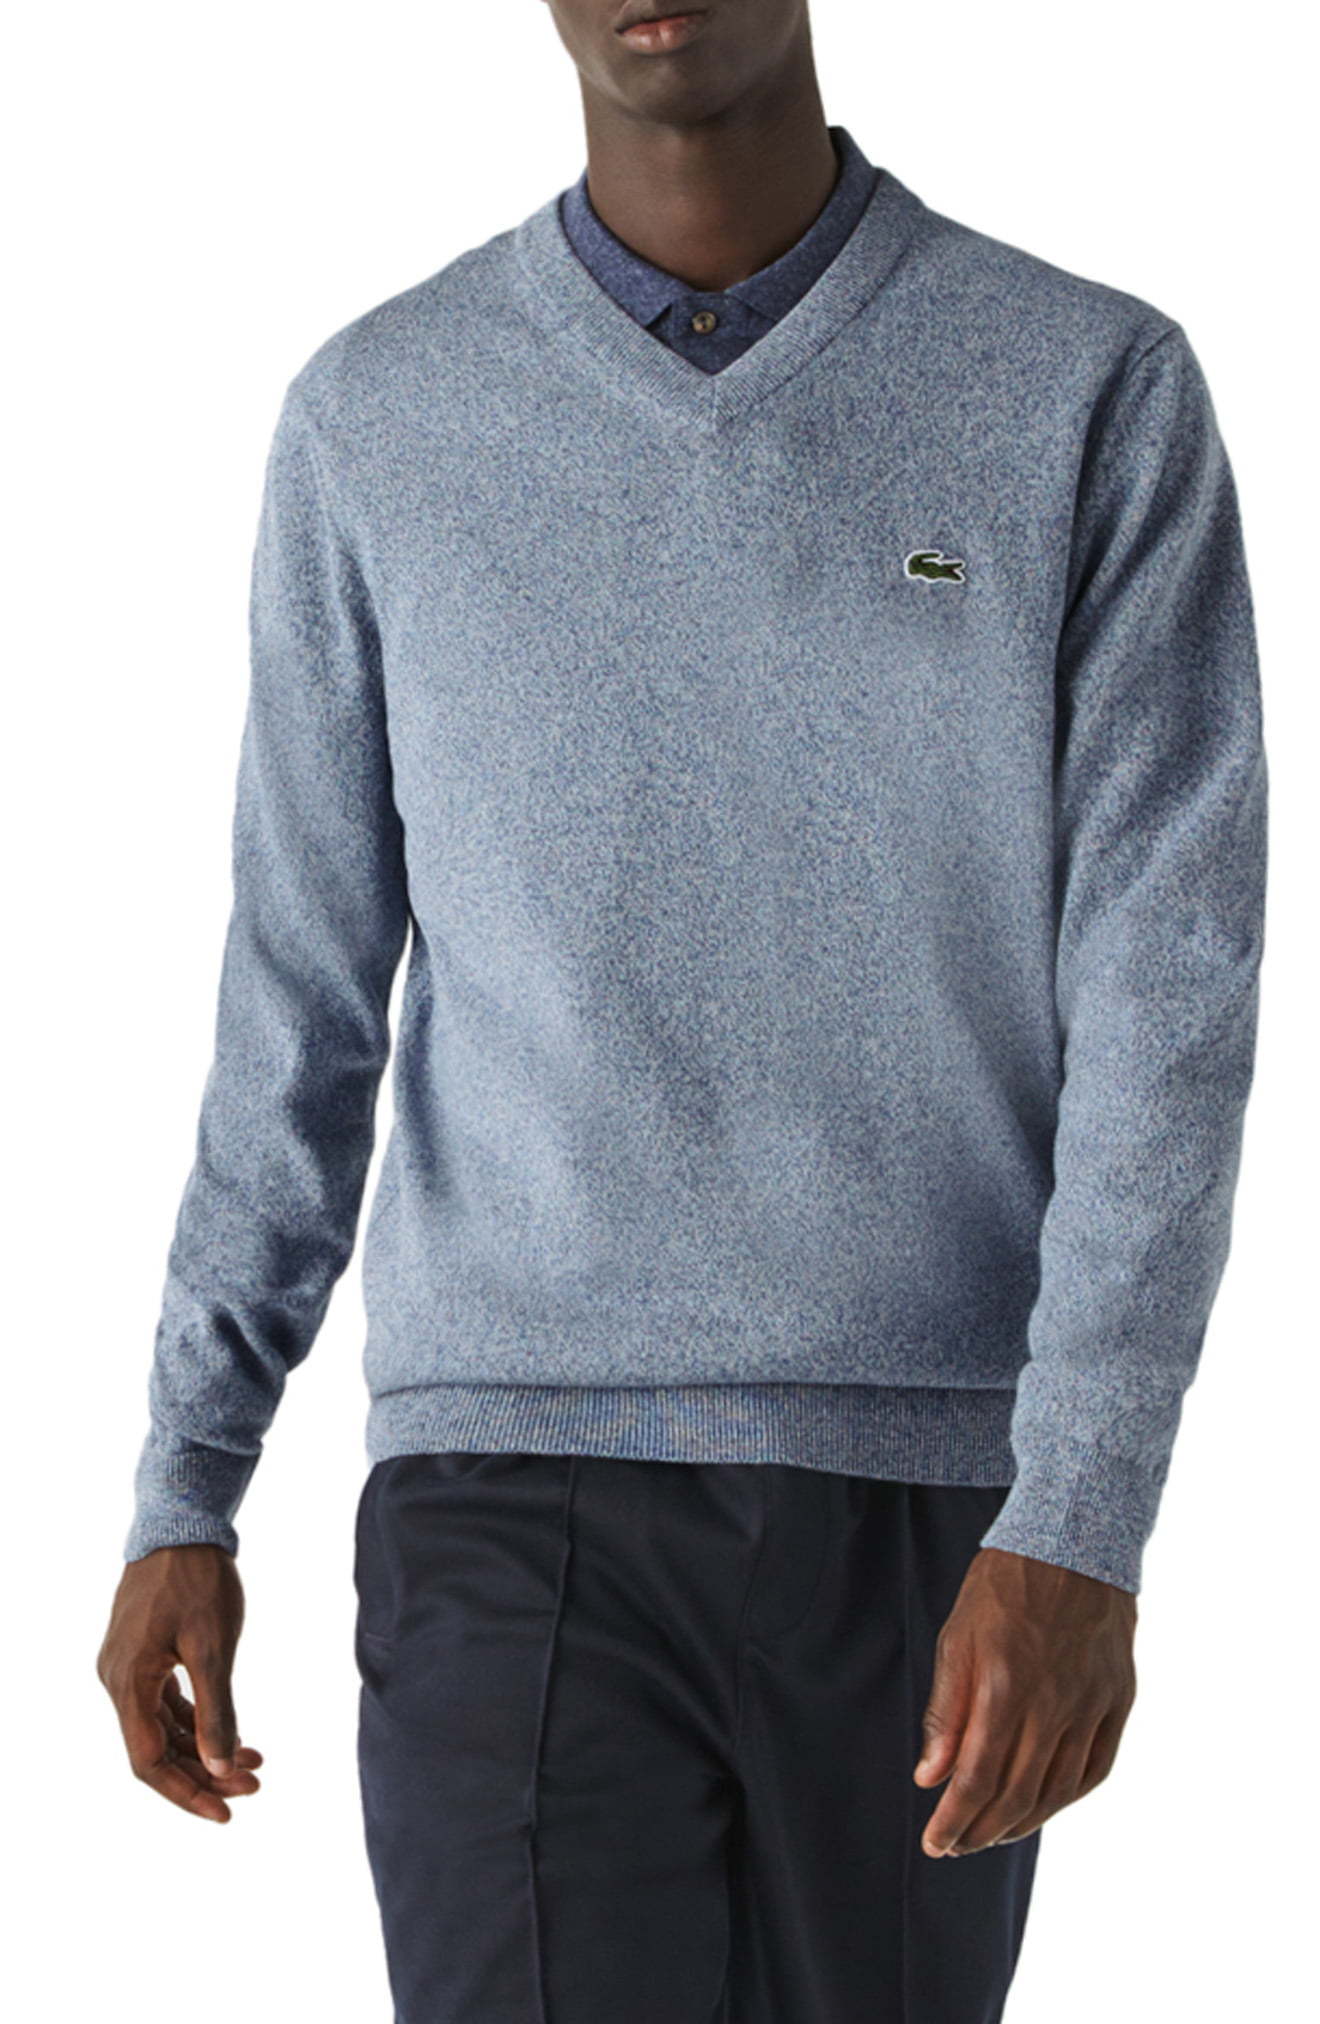 Lacoste Tricot V Neck Cotton Sweater, $98 | Nordstrom | Lookastic